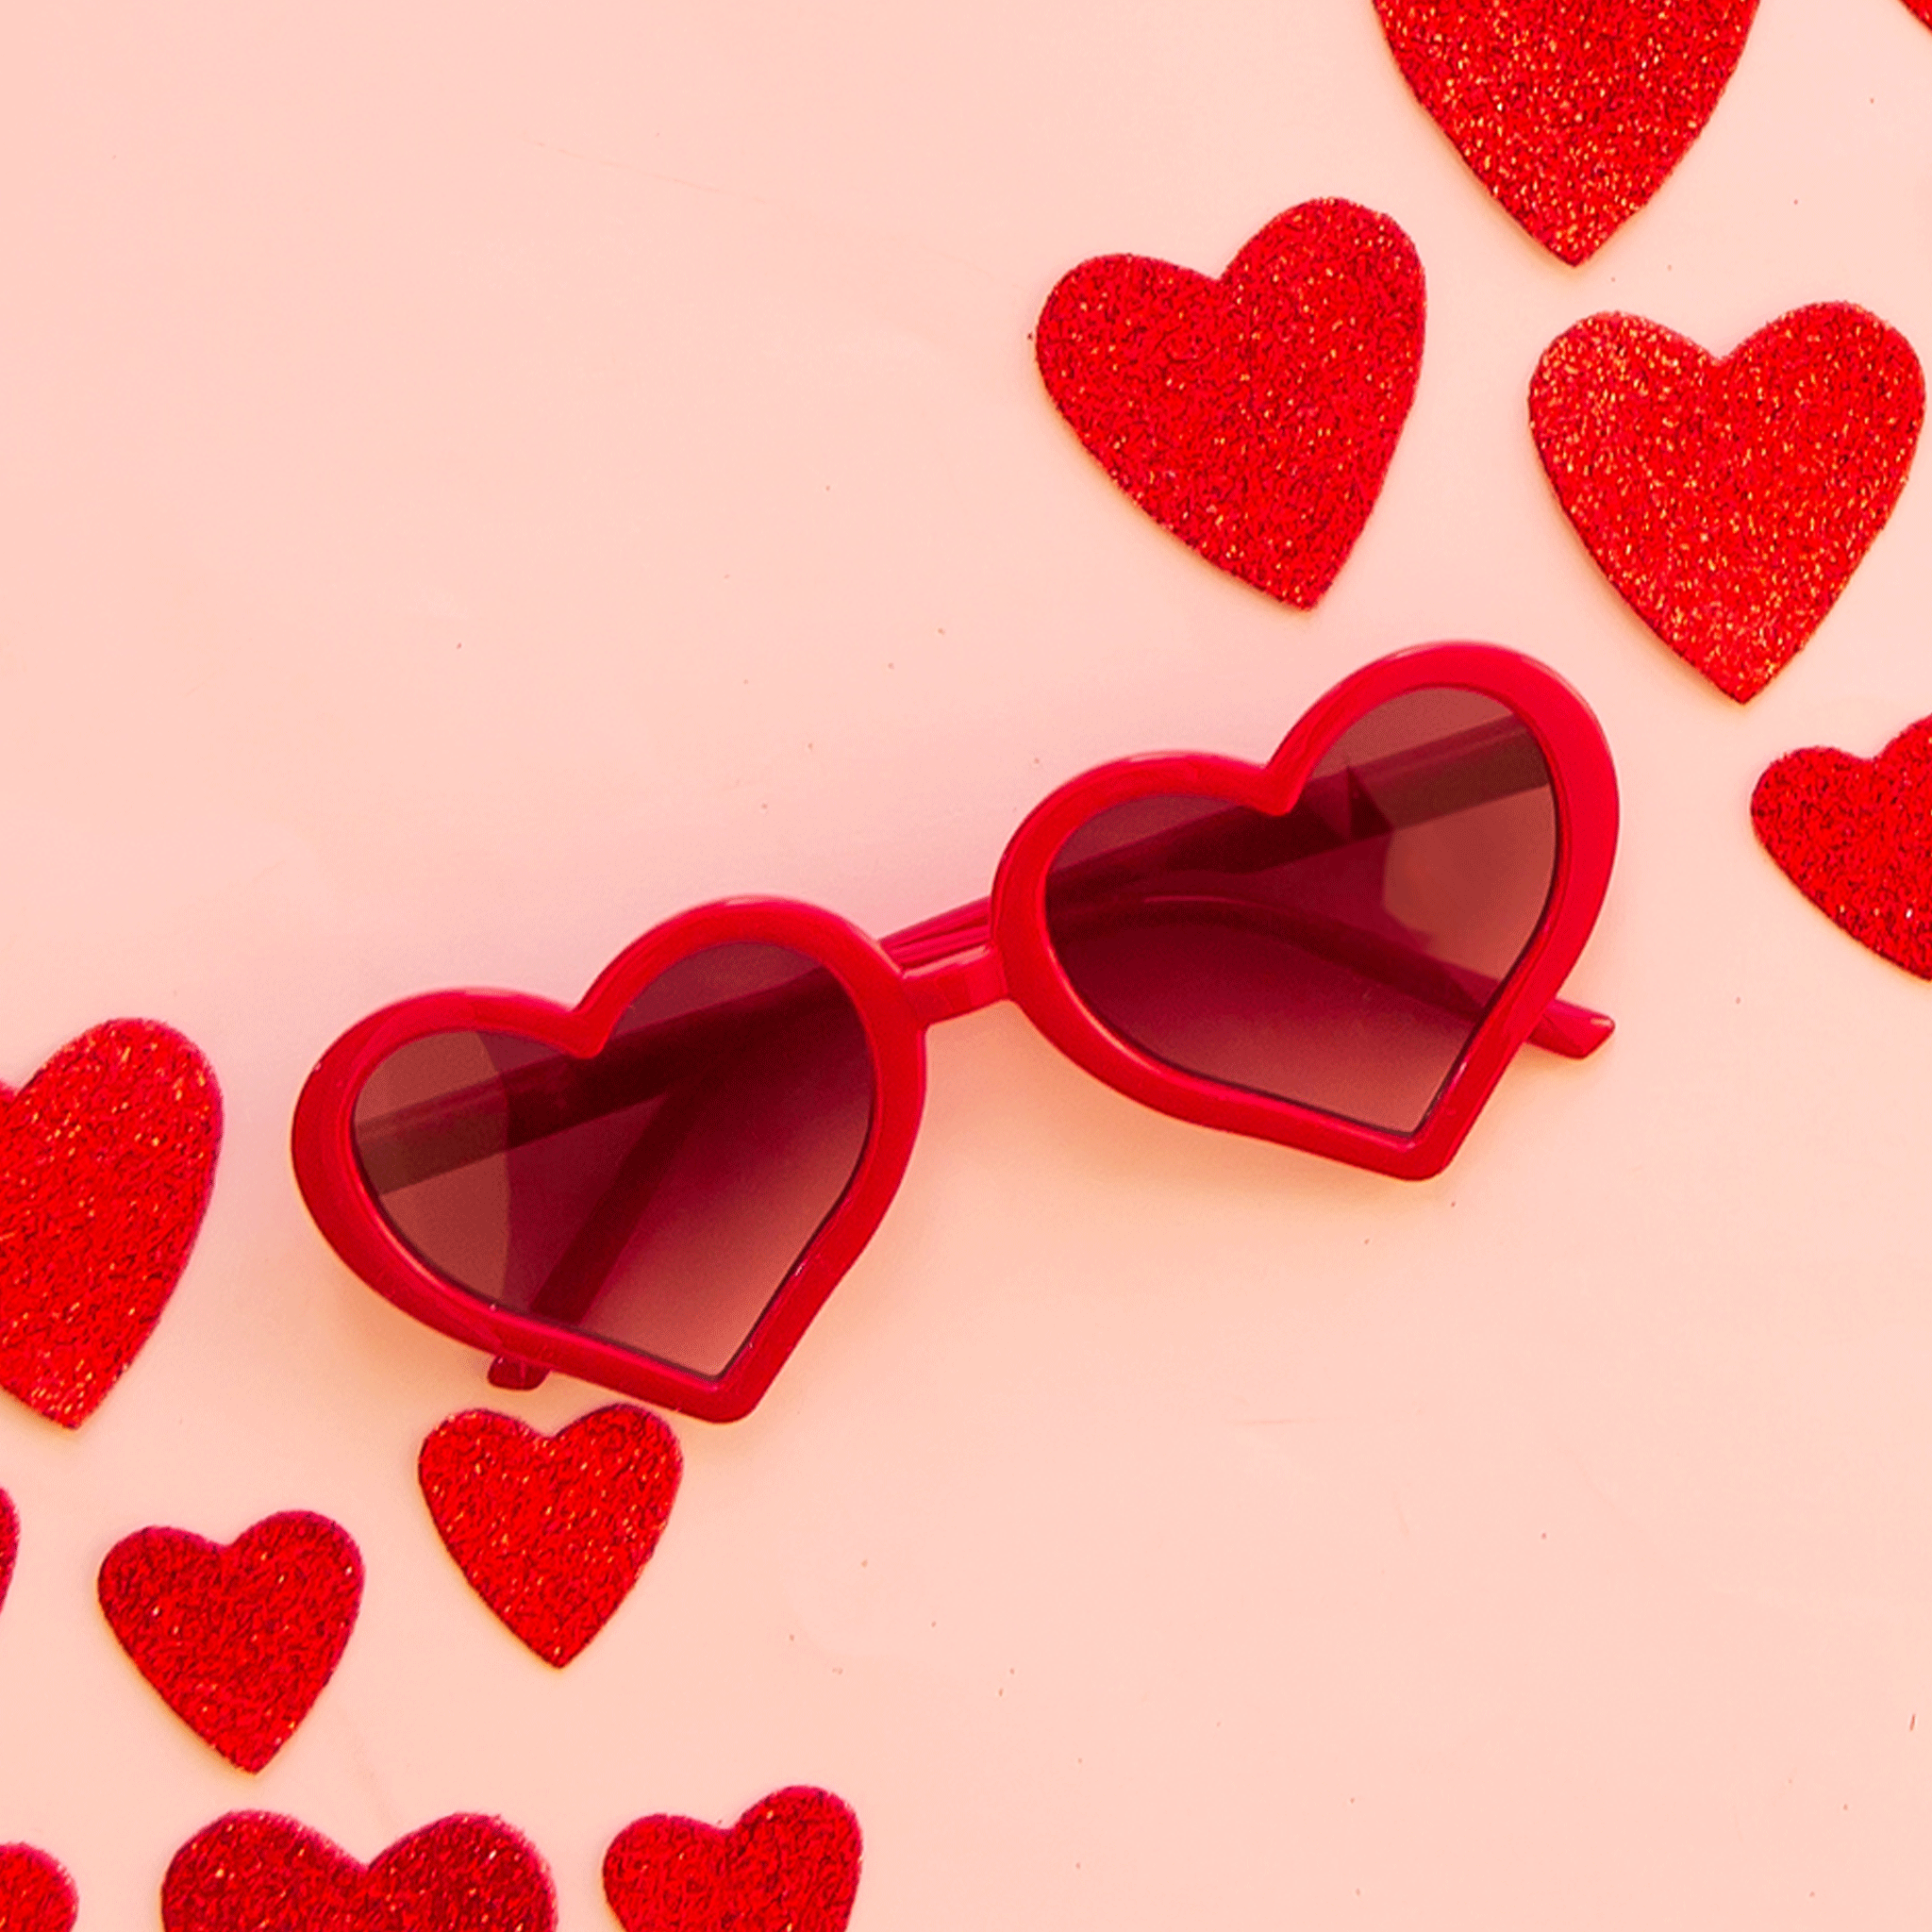 On a pink background is a red pair of heart shaped sunglasses. 